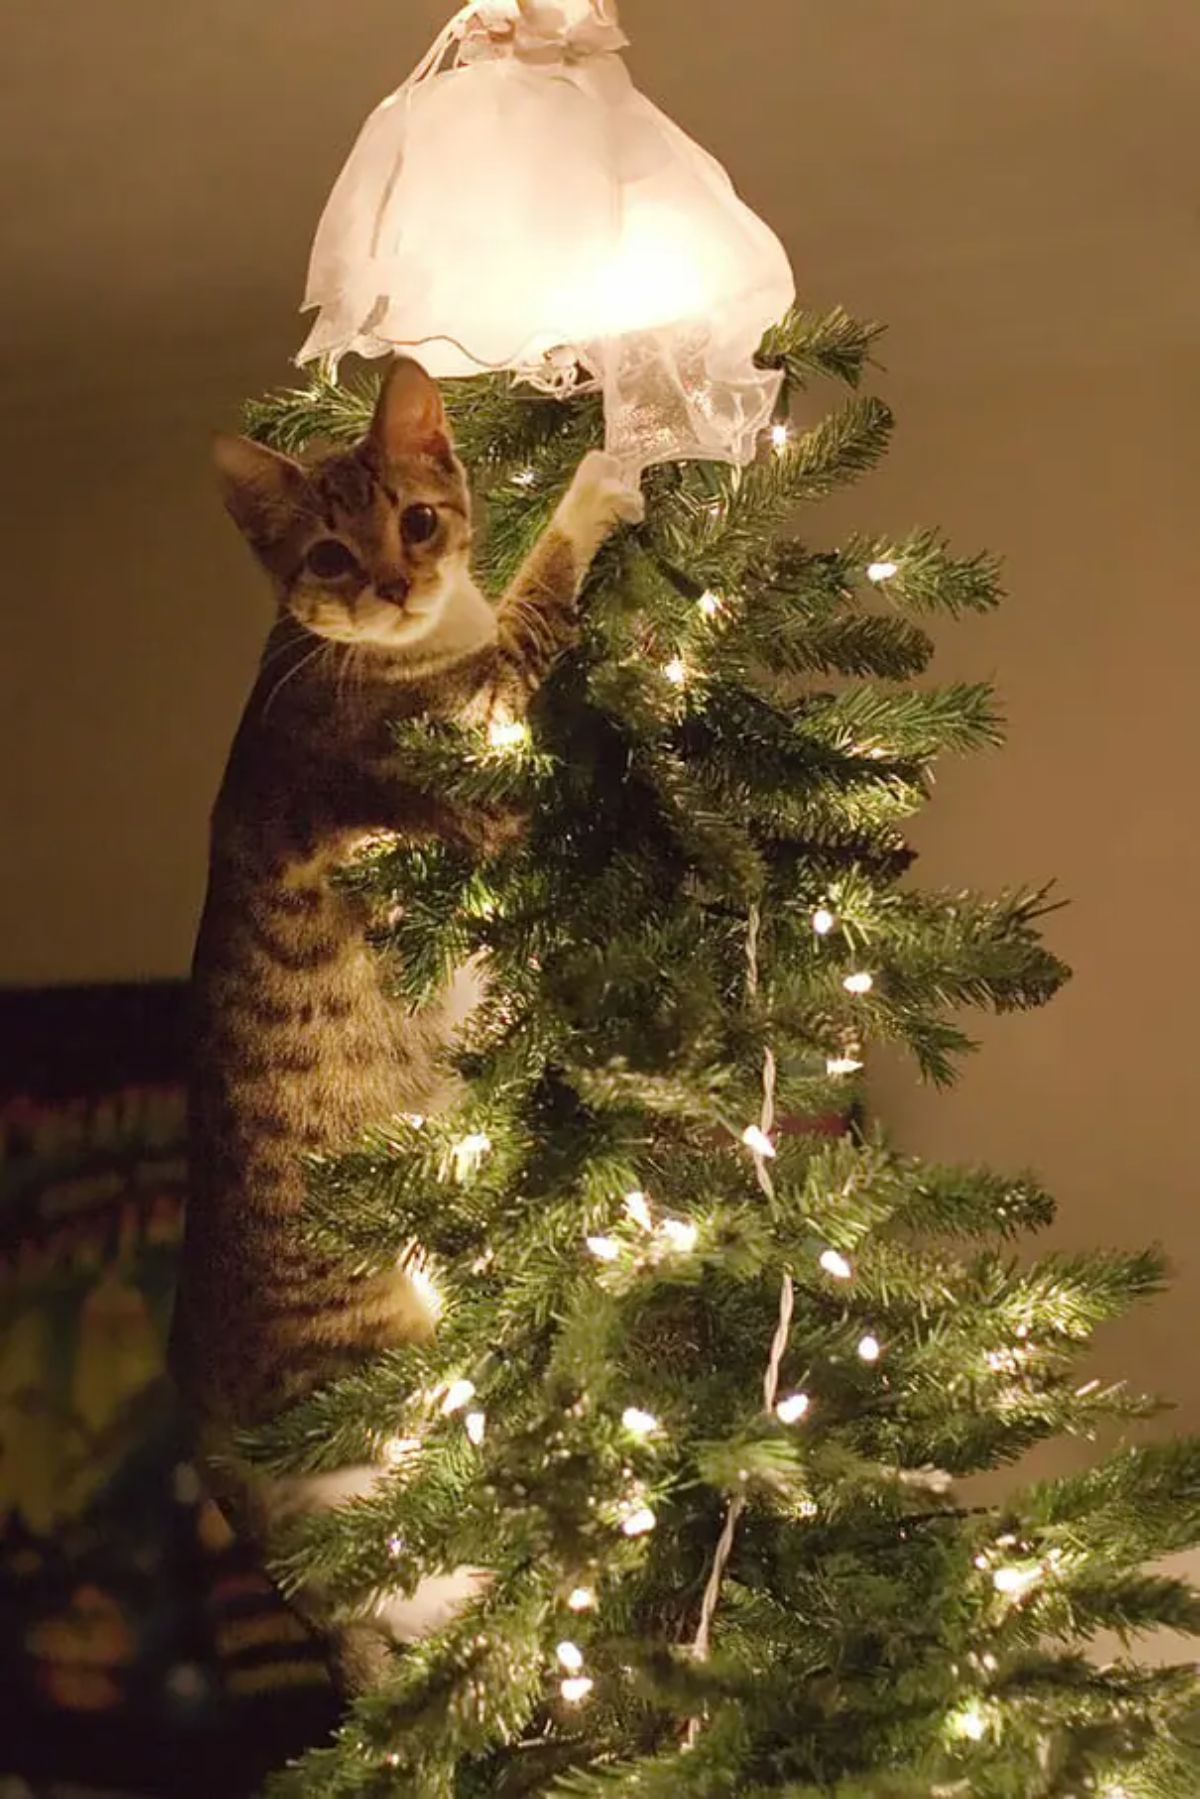 brown and white tabby cat standing in a lit up christmas tree reaching up for the angel at the top